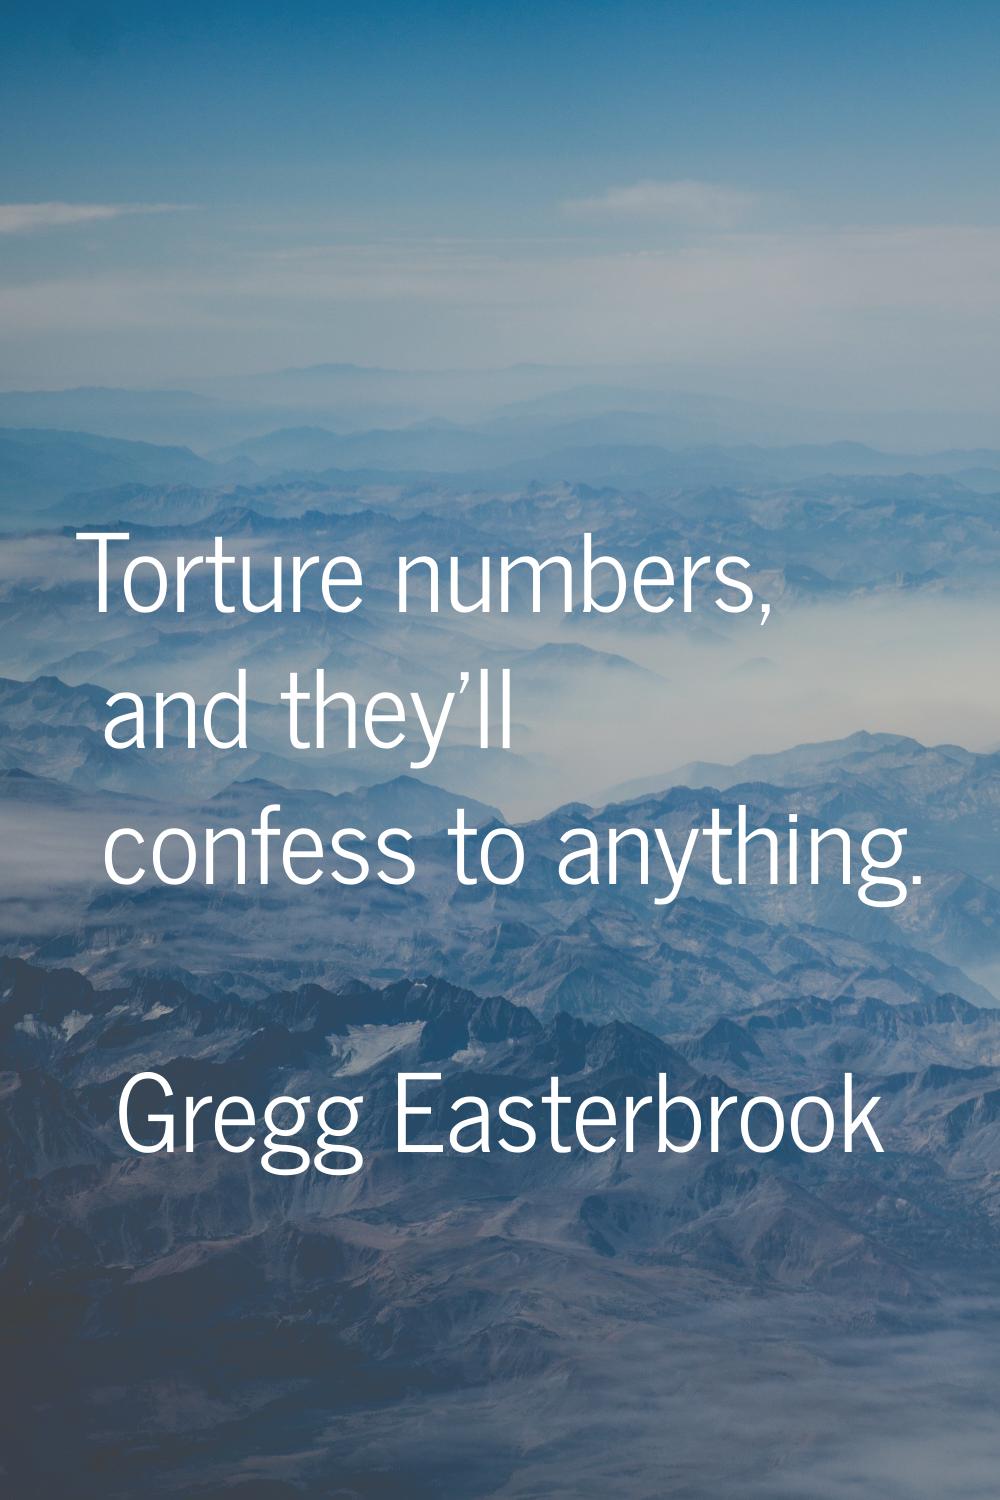 Torture numbers, and they'll confess to anything.